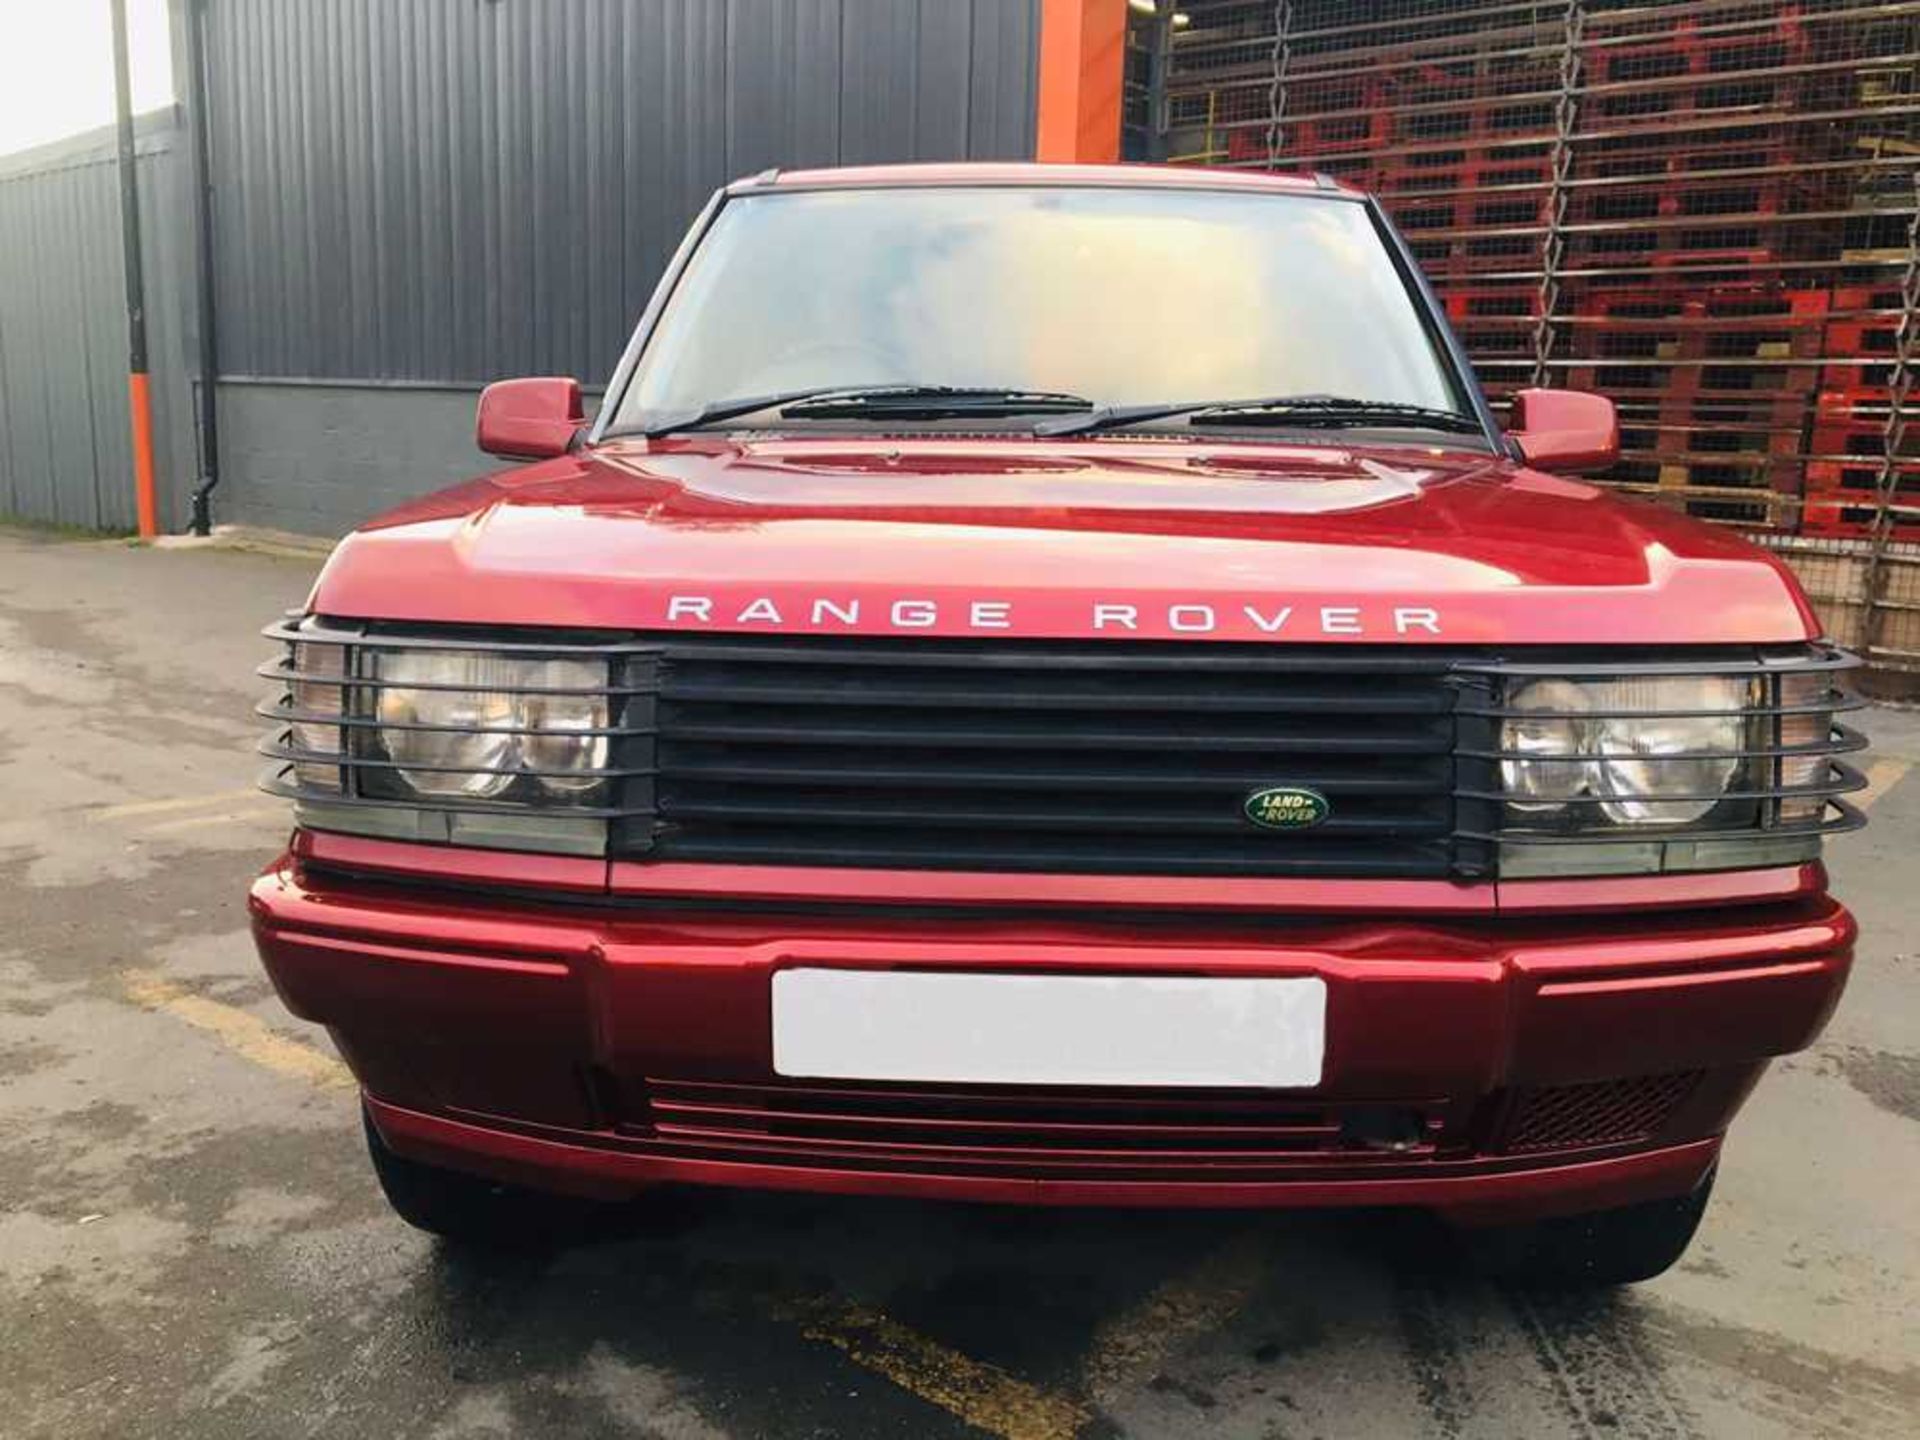 2001 Range Rover 2.5 TD Bordeaux One of just 200 UK-supplied limited edition 'Bordeaux' examples - Image 2 of 20